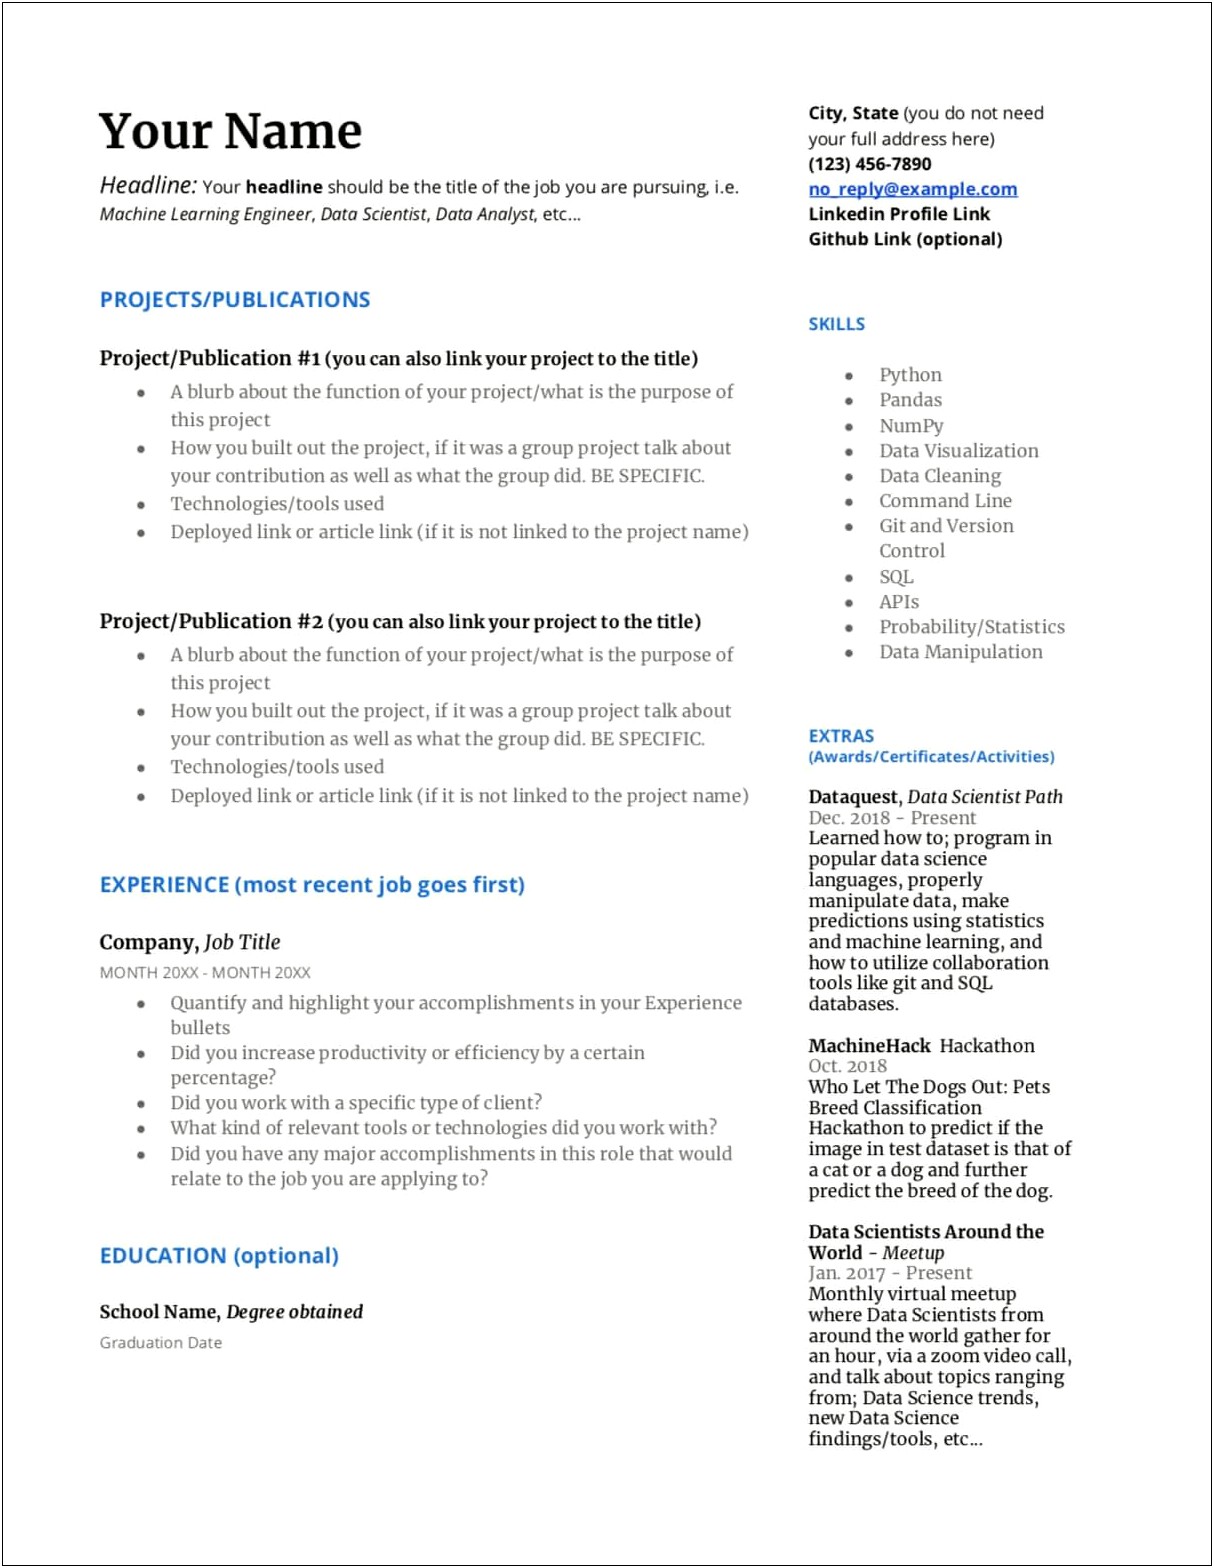 View Finished Examples Of Simple Resumes